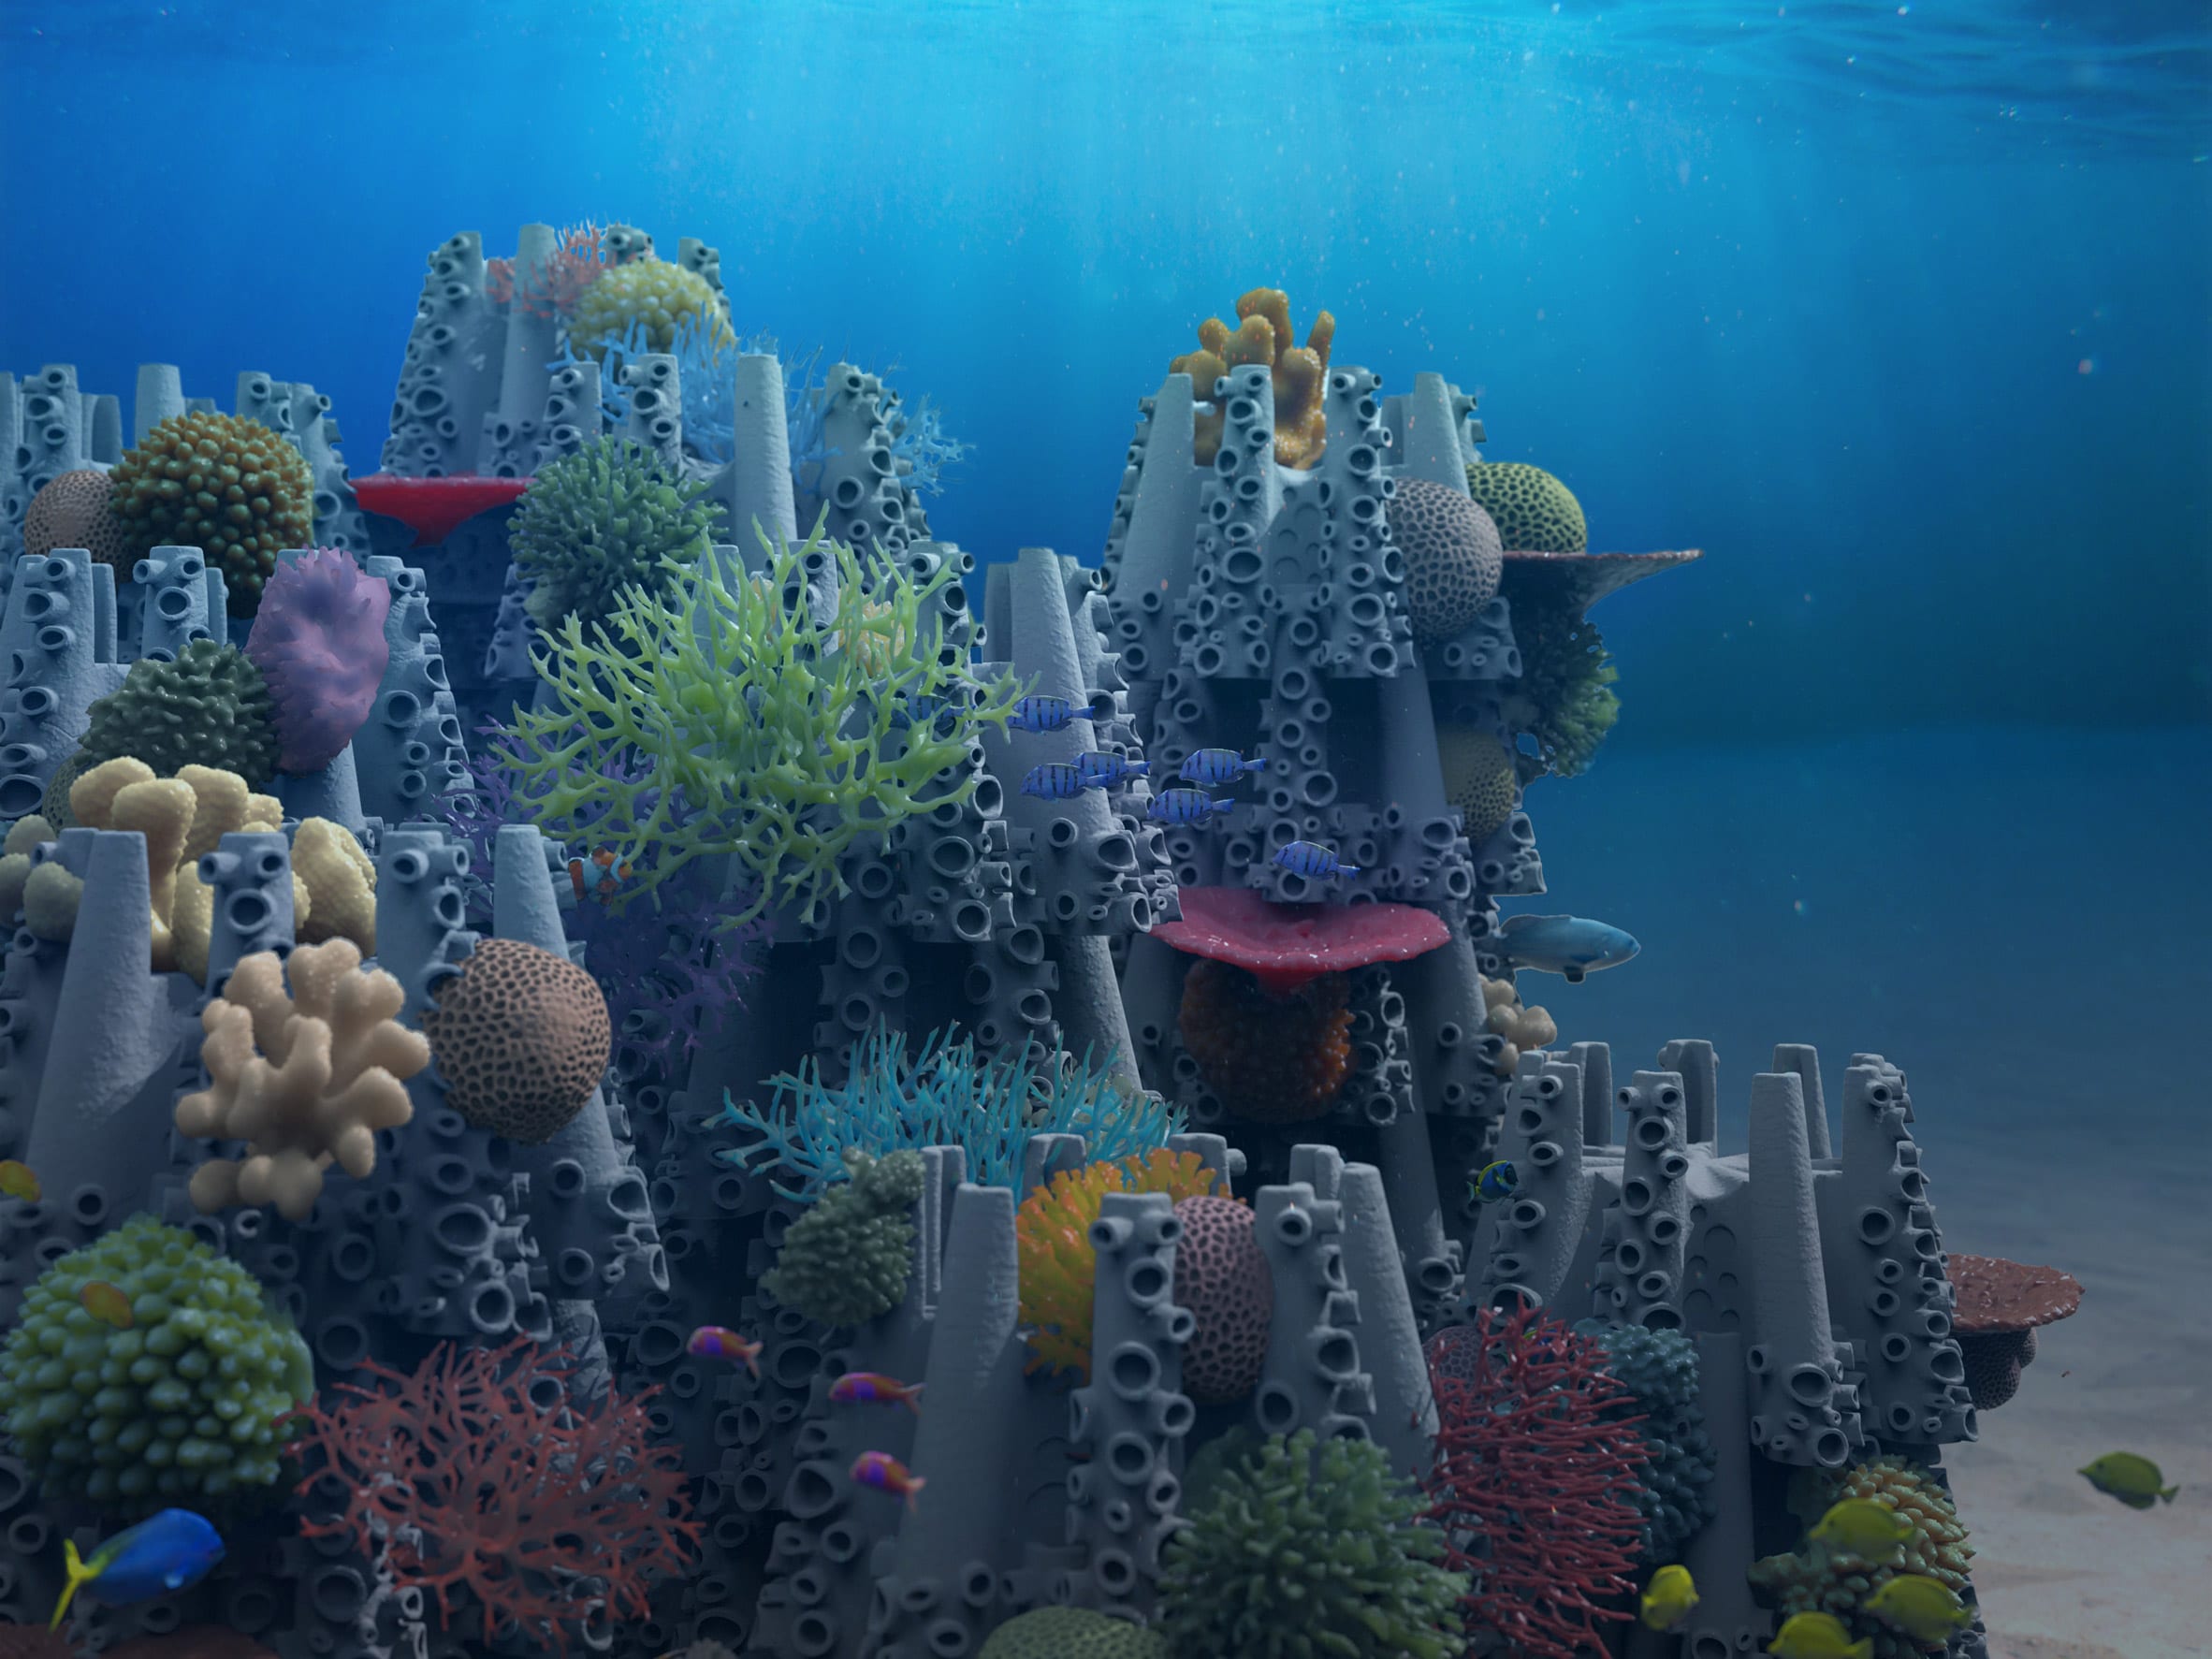 Real estate' for corals: Swiss organisation builds artificial reefs with  art, tech